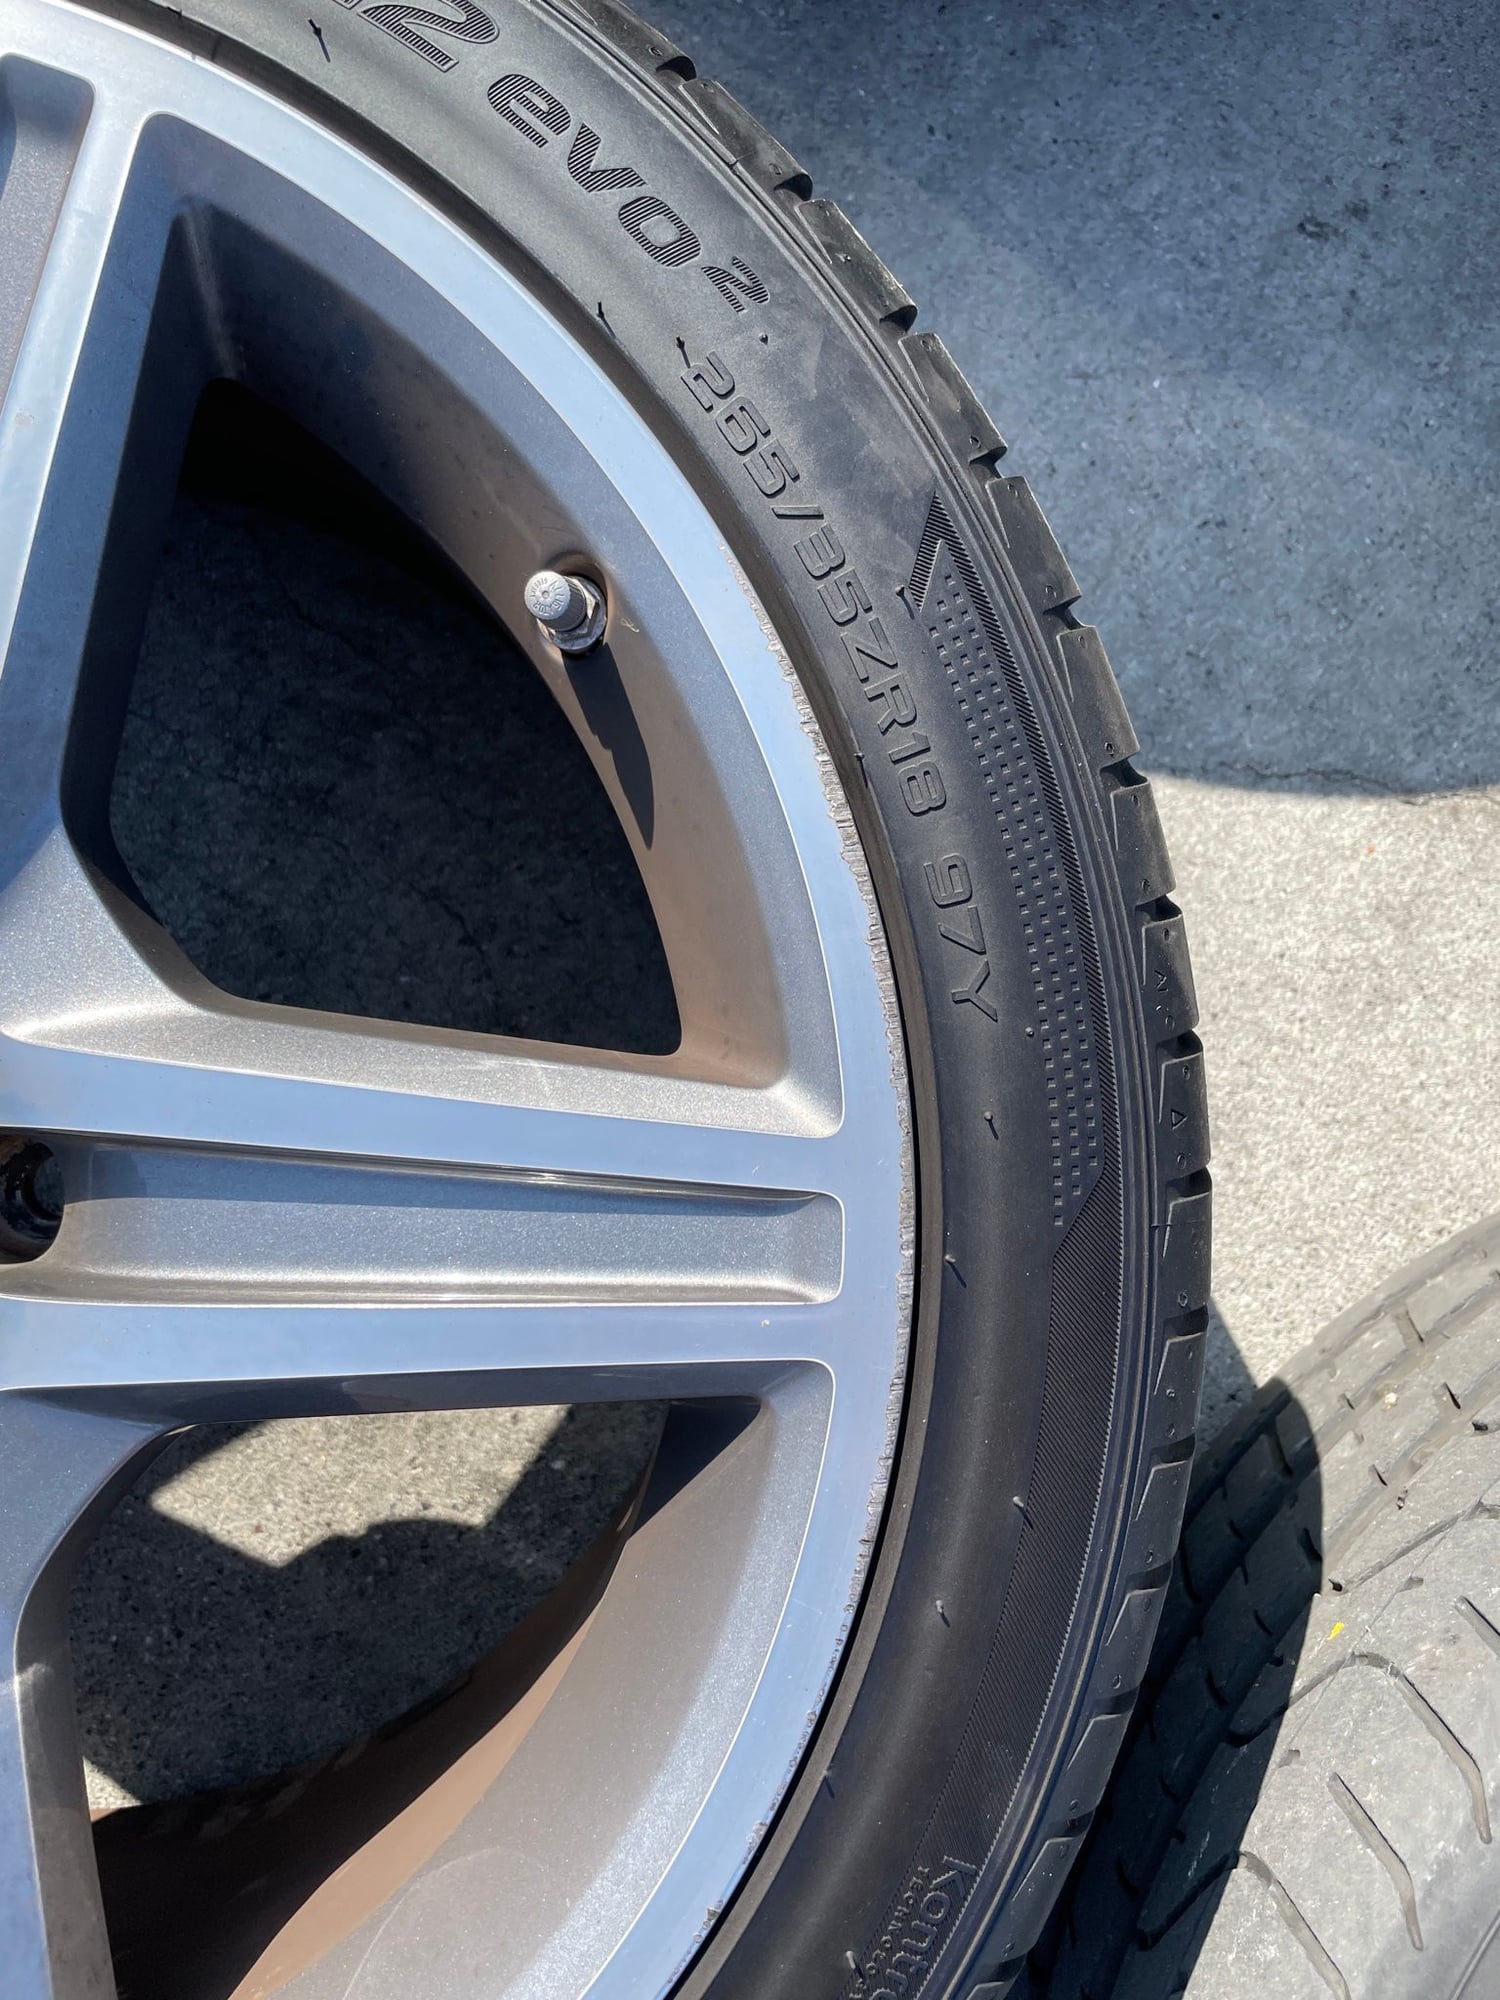 Wheels and Tires/Axles - W211 E63 AMG 18 inch one-piece stock wheels - Used - 2003 to 2009 Mercedes-Benz E-Class - San Jose, CA 95131, United States